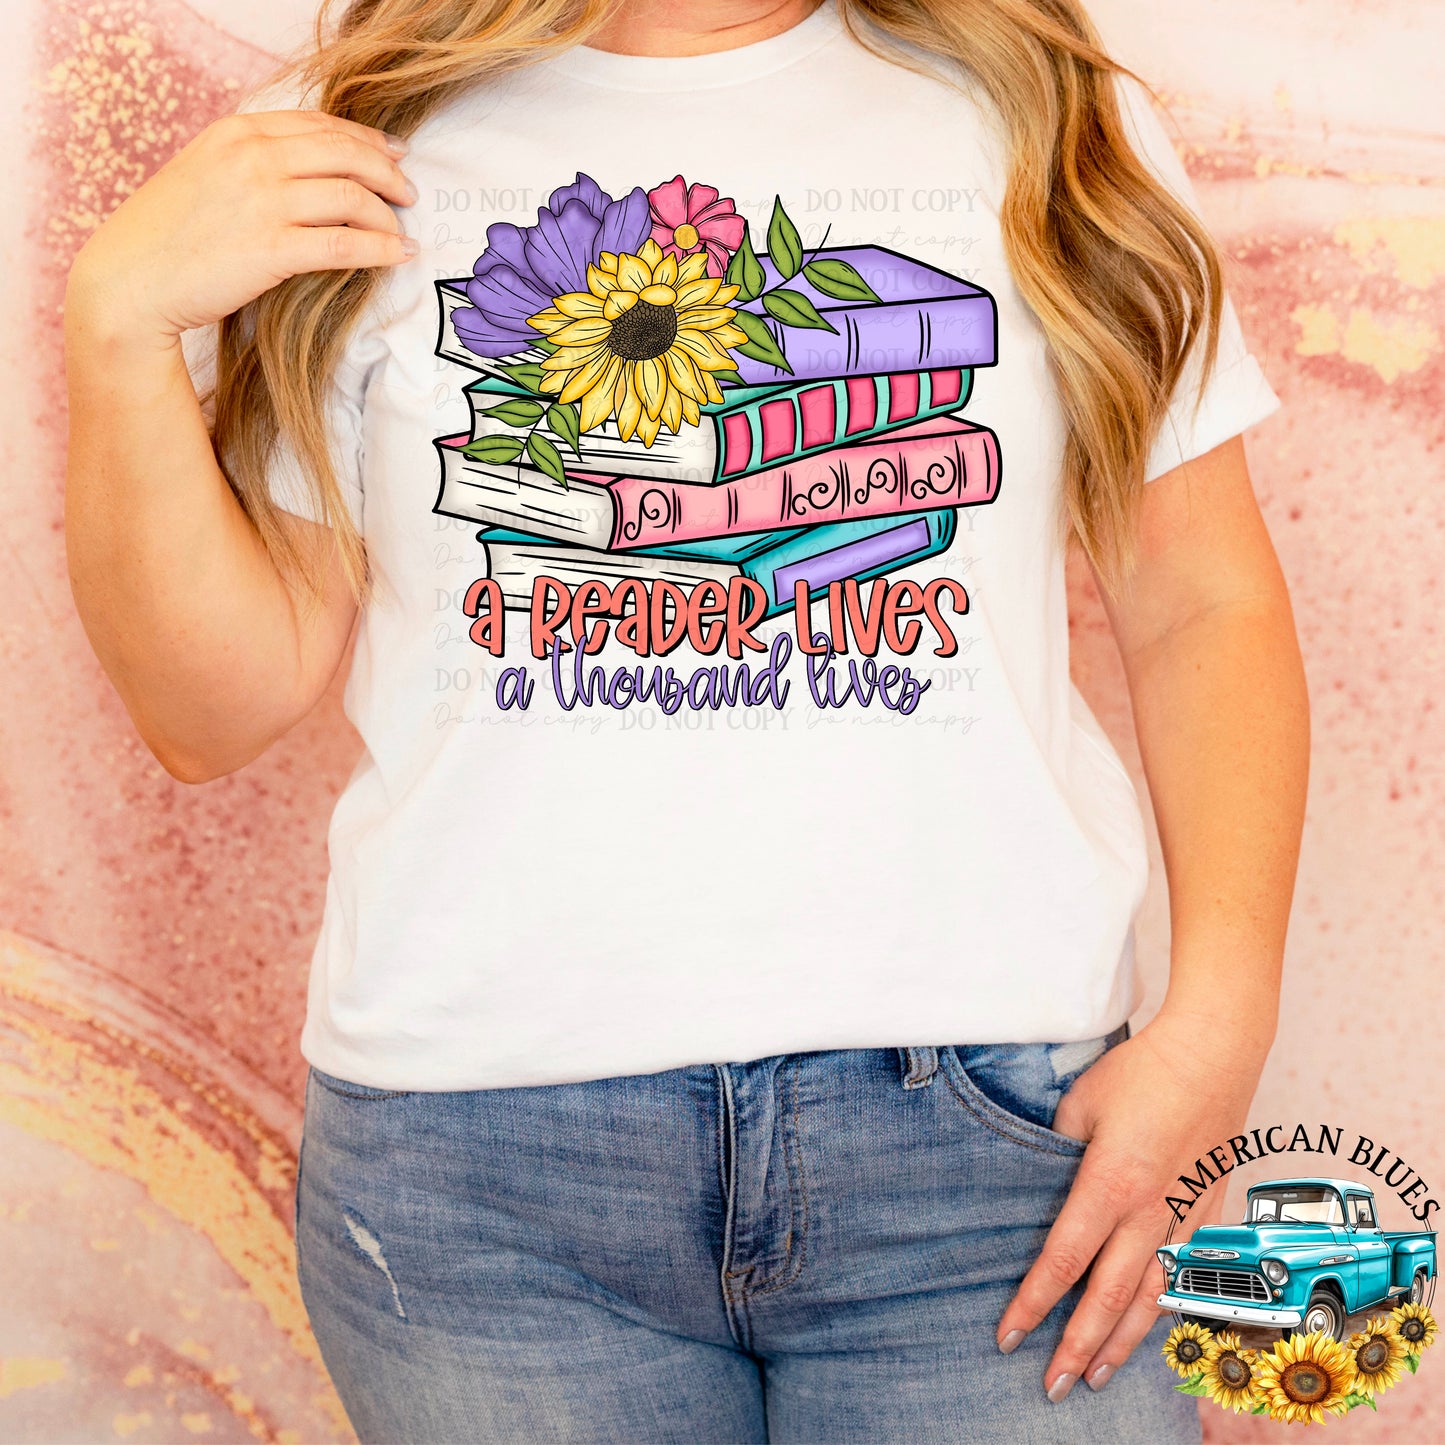 A read lives a thousand lives | American Blues Designs